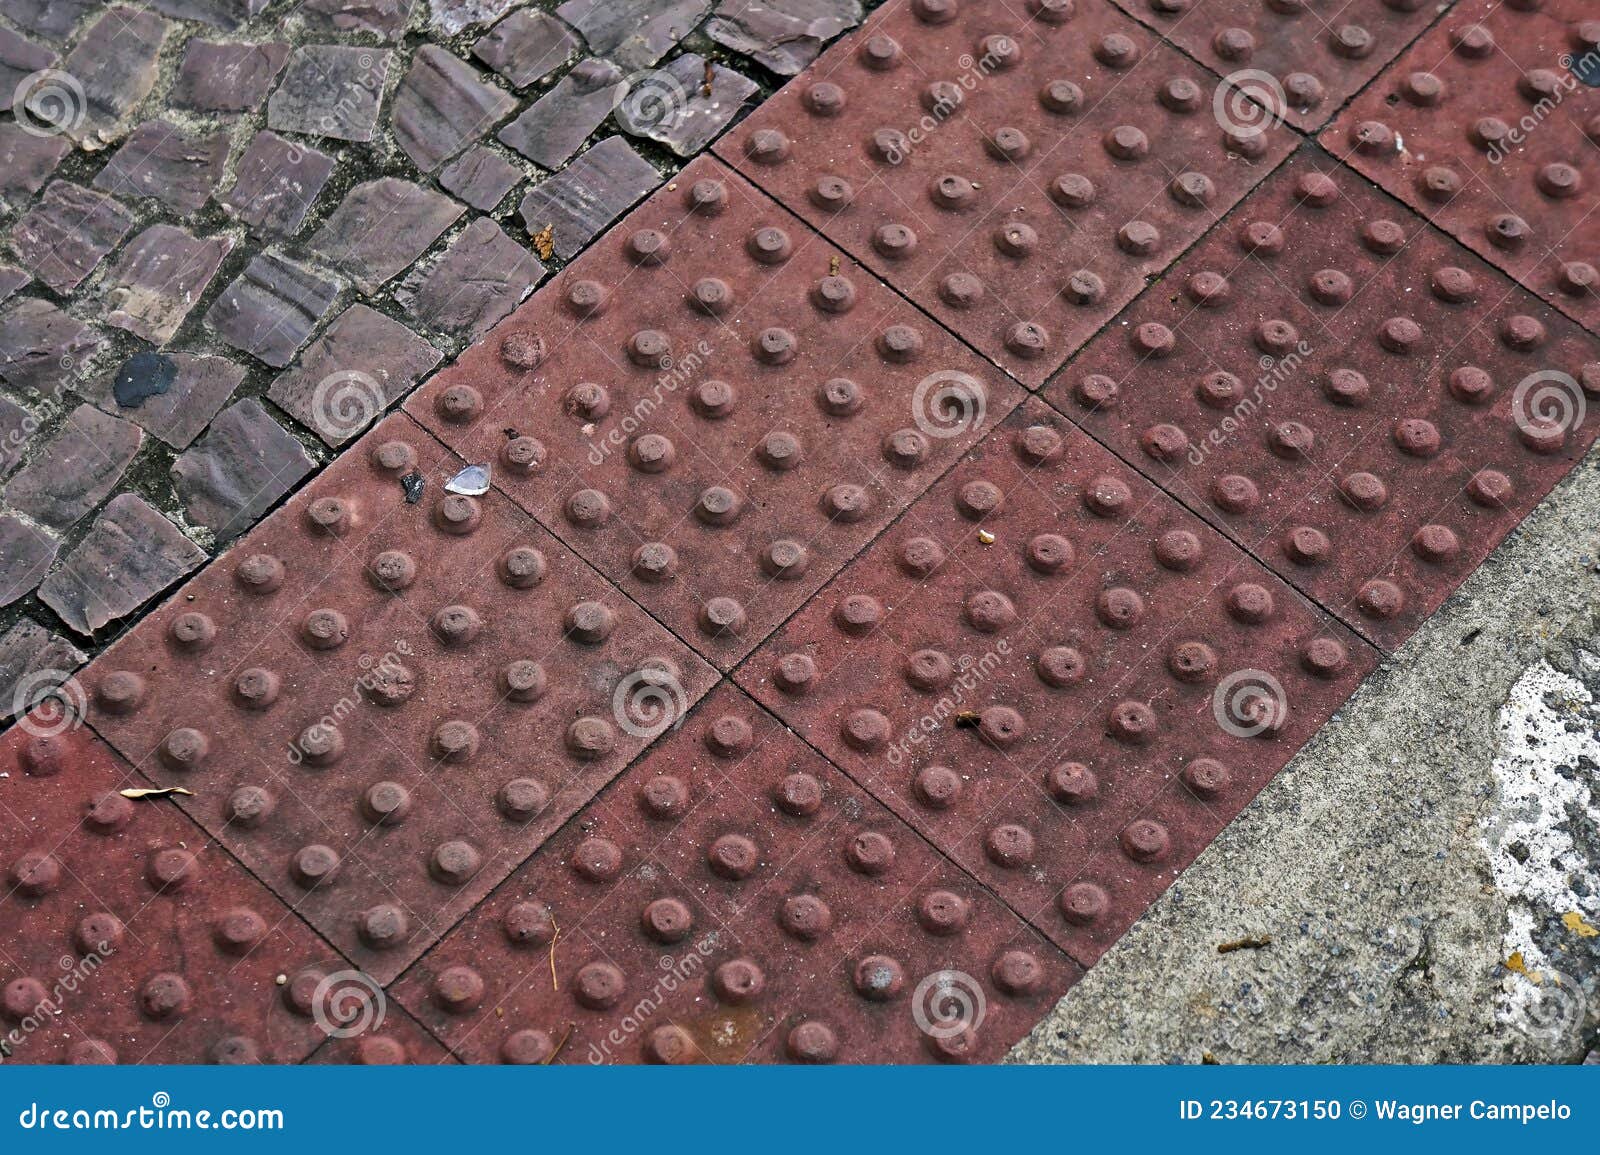 Warning Bumps For Blind People On Sidewalk Stock Photo Image Of